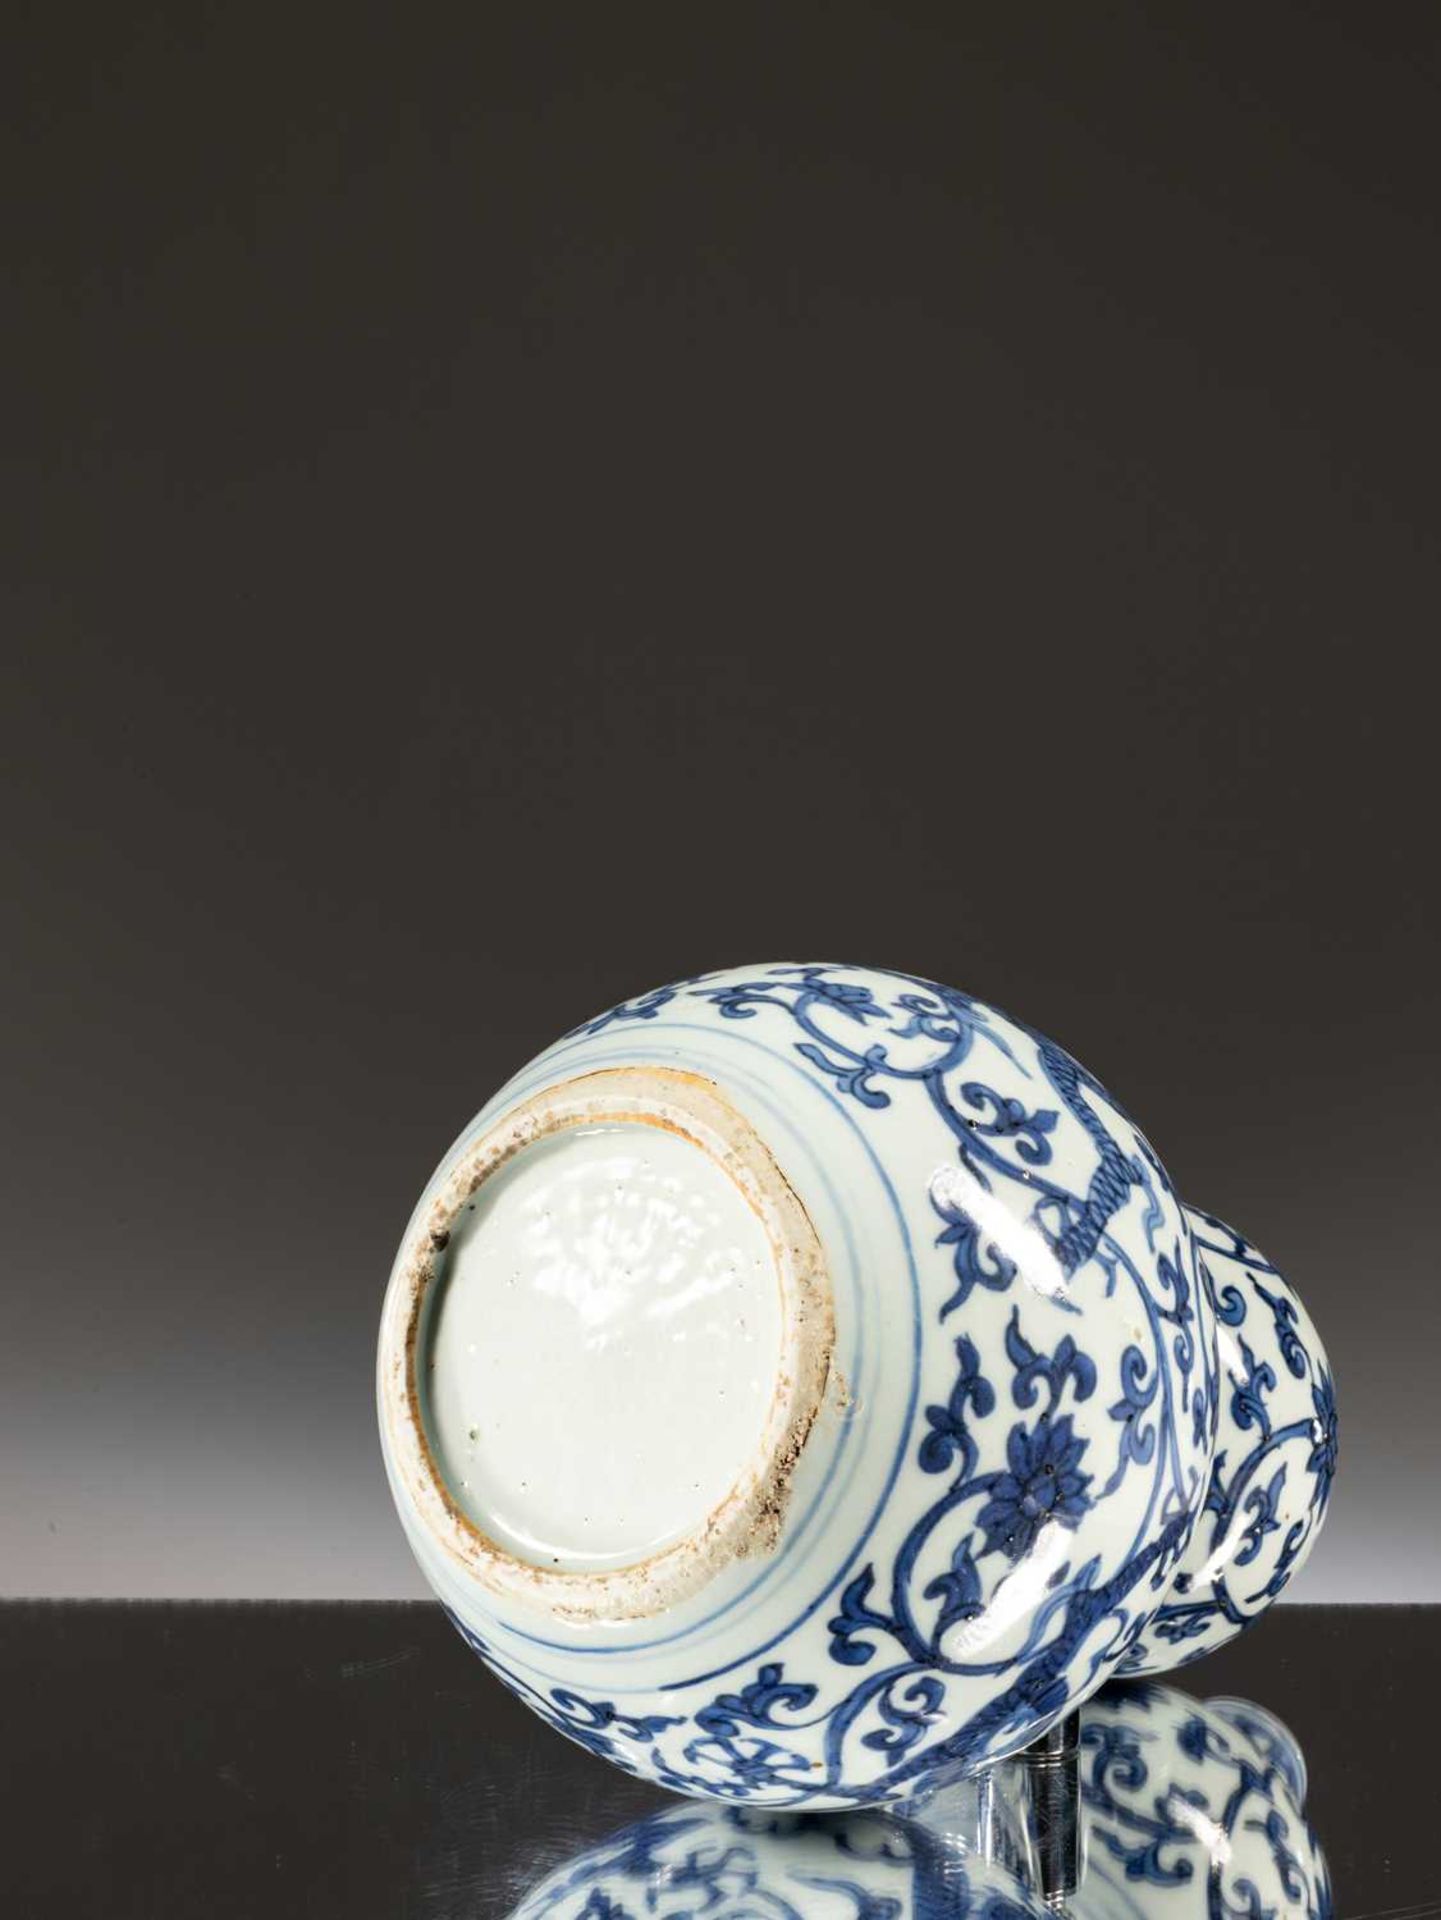 BLUE AND WHITE DOUBLE-GOURD VASE - Image 3 of 4